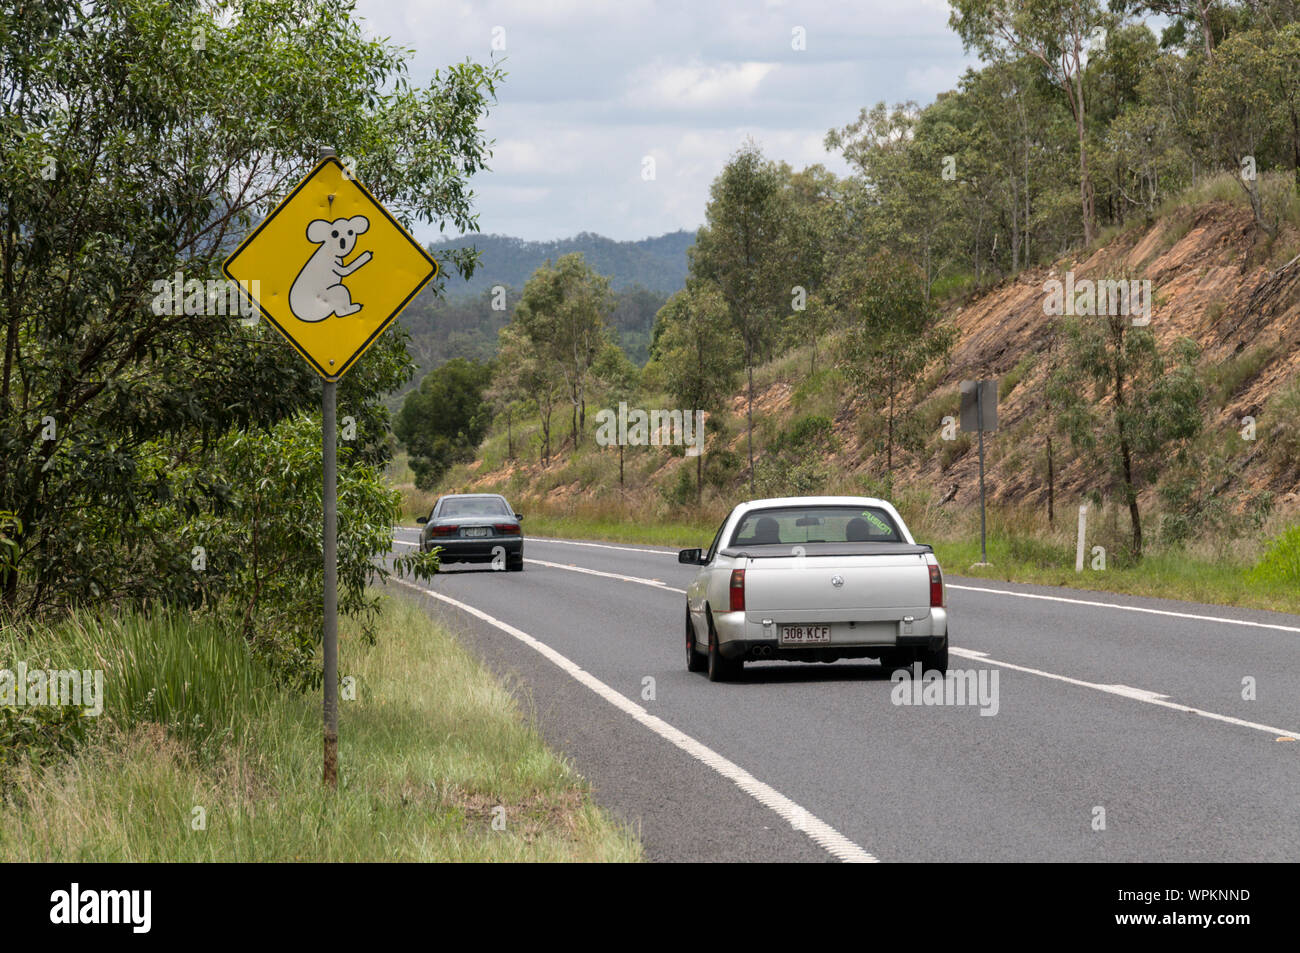 A Koala warning sign seen on roads that have local koala habitat in Queensland, Australia.   The sign warns motorists that they are approaching a loca Stock Photo